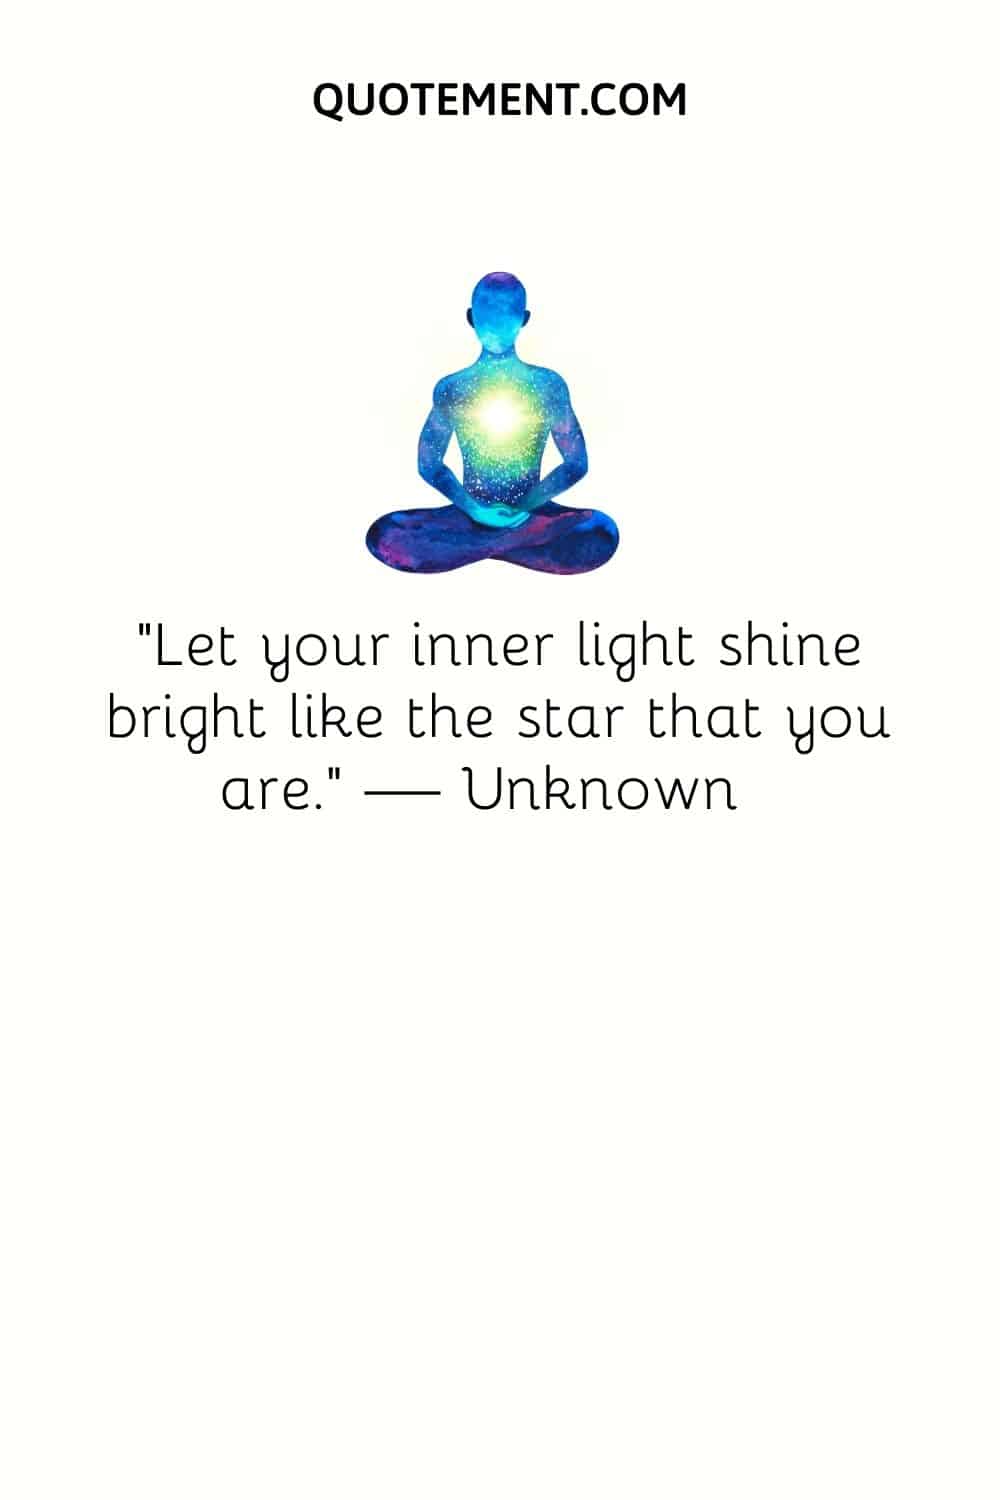 “Let your inner light shine bright like the star that you are.” — Unknown